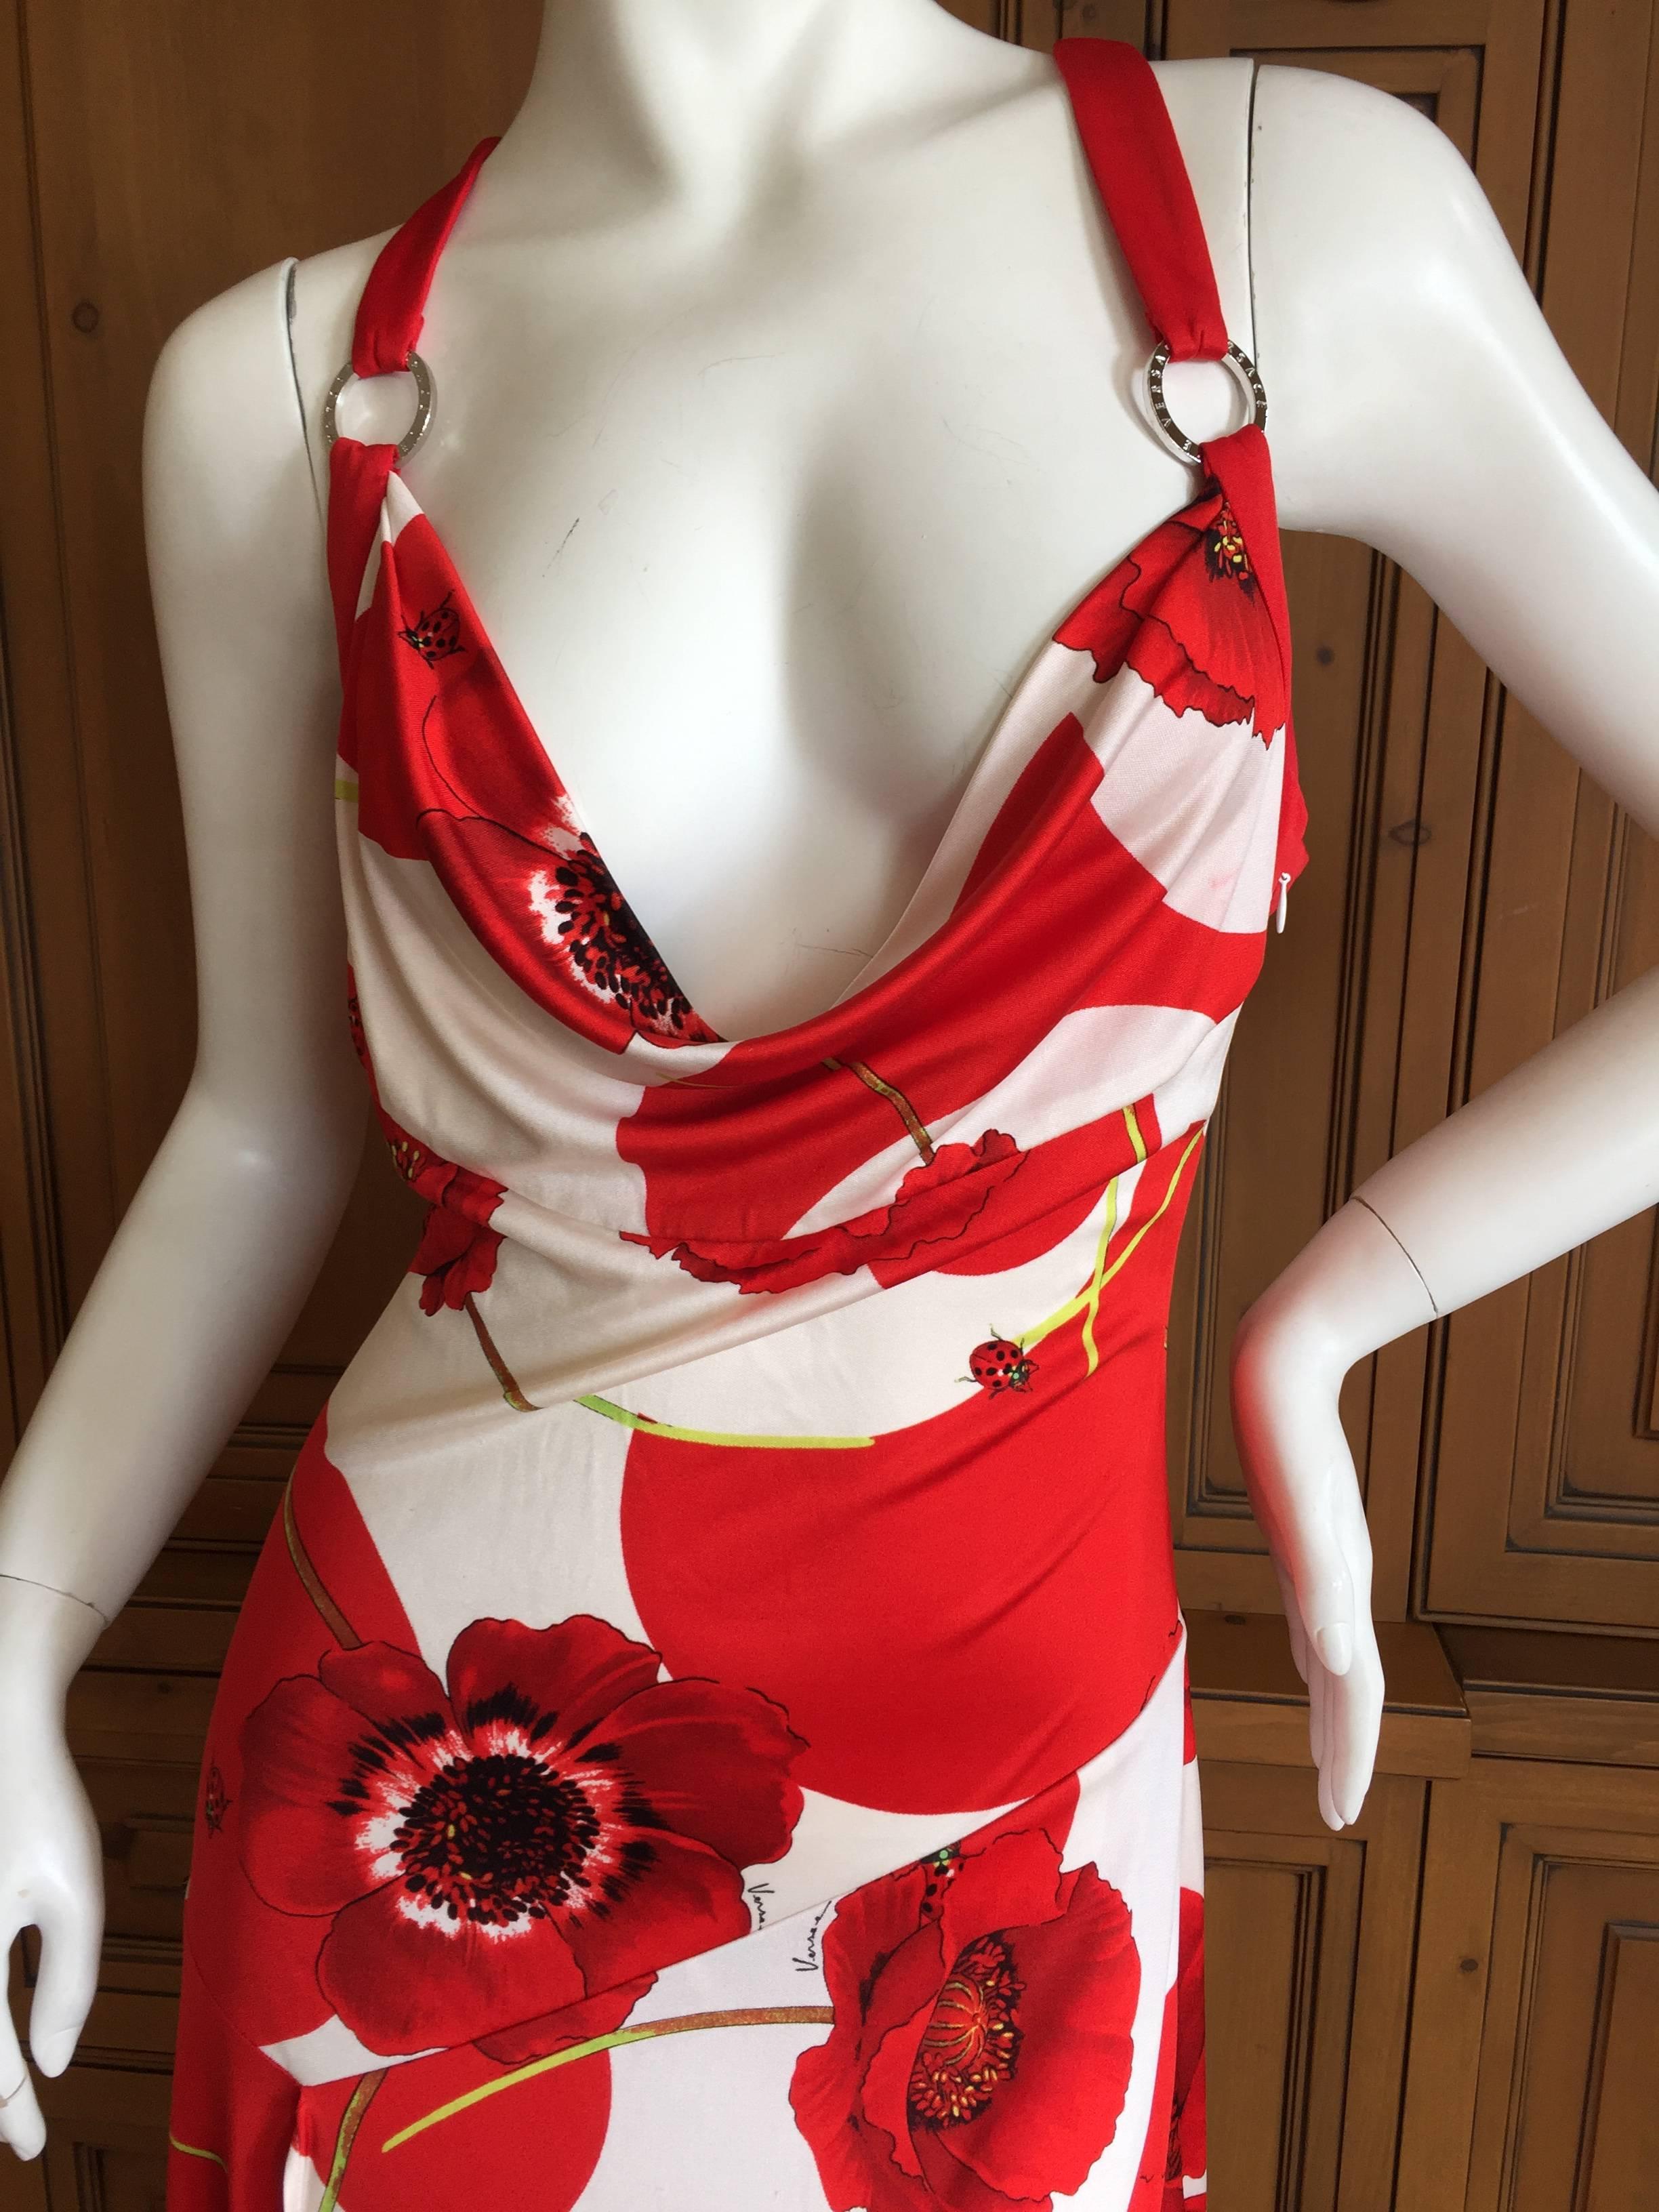 Beautiful silk jersey dress with poppies and ladybugs from Versace.

Size 42
There is a lot of stretch in the fabric.
Bust 42